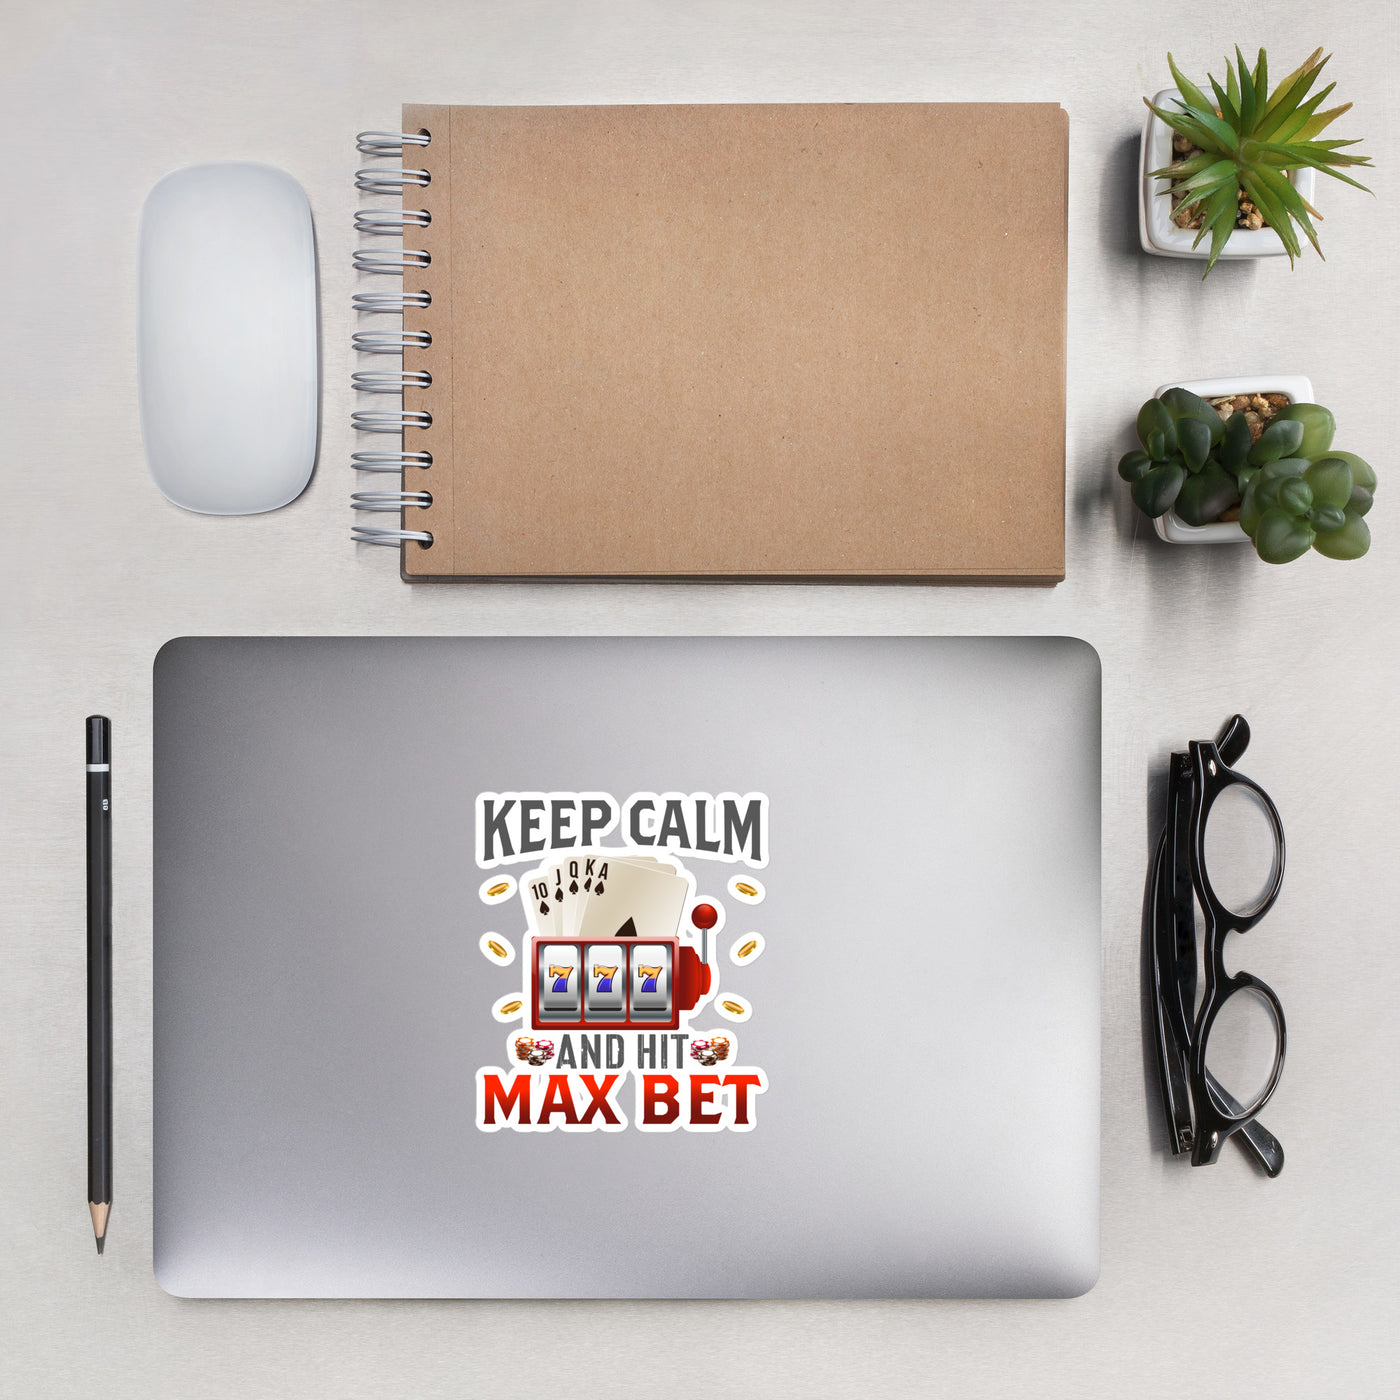 Keep Calm and Hit Max Bet - Bubble-free stickers